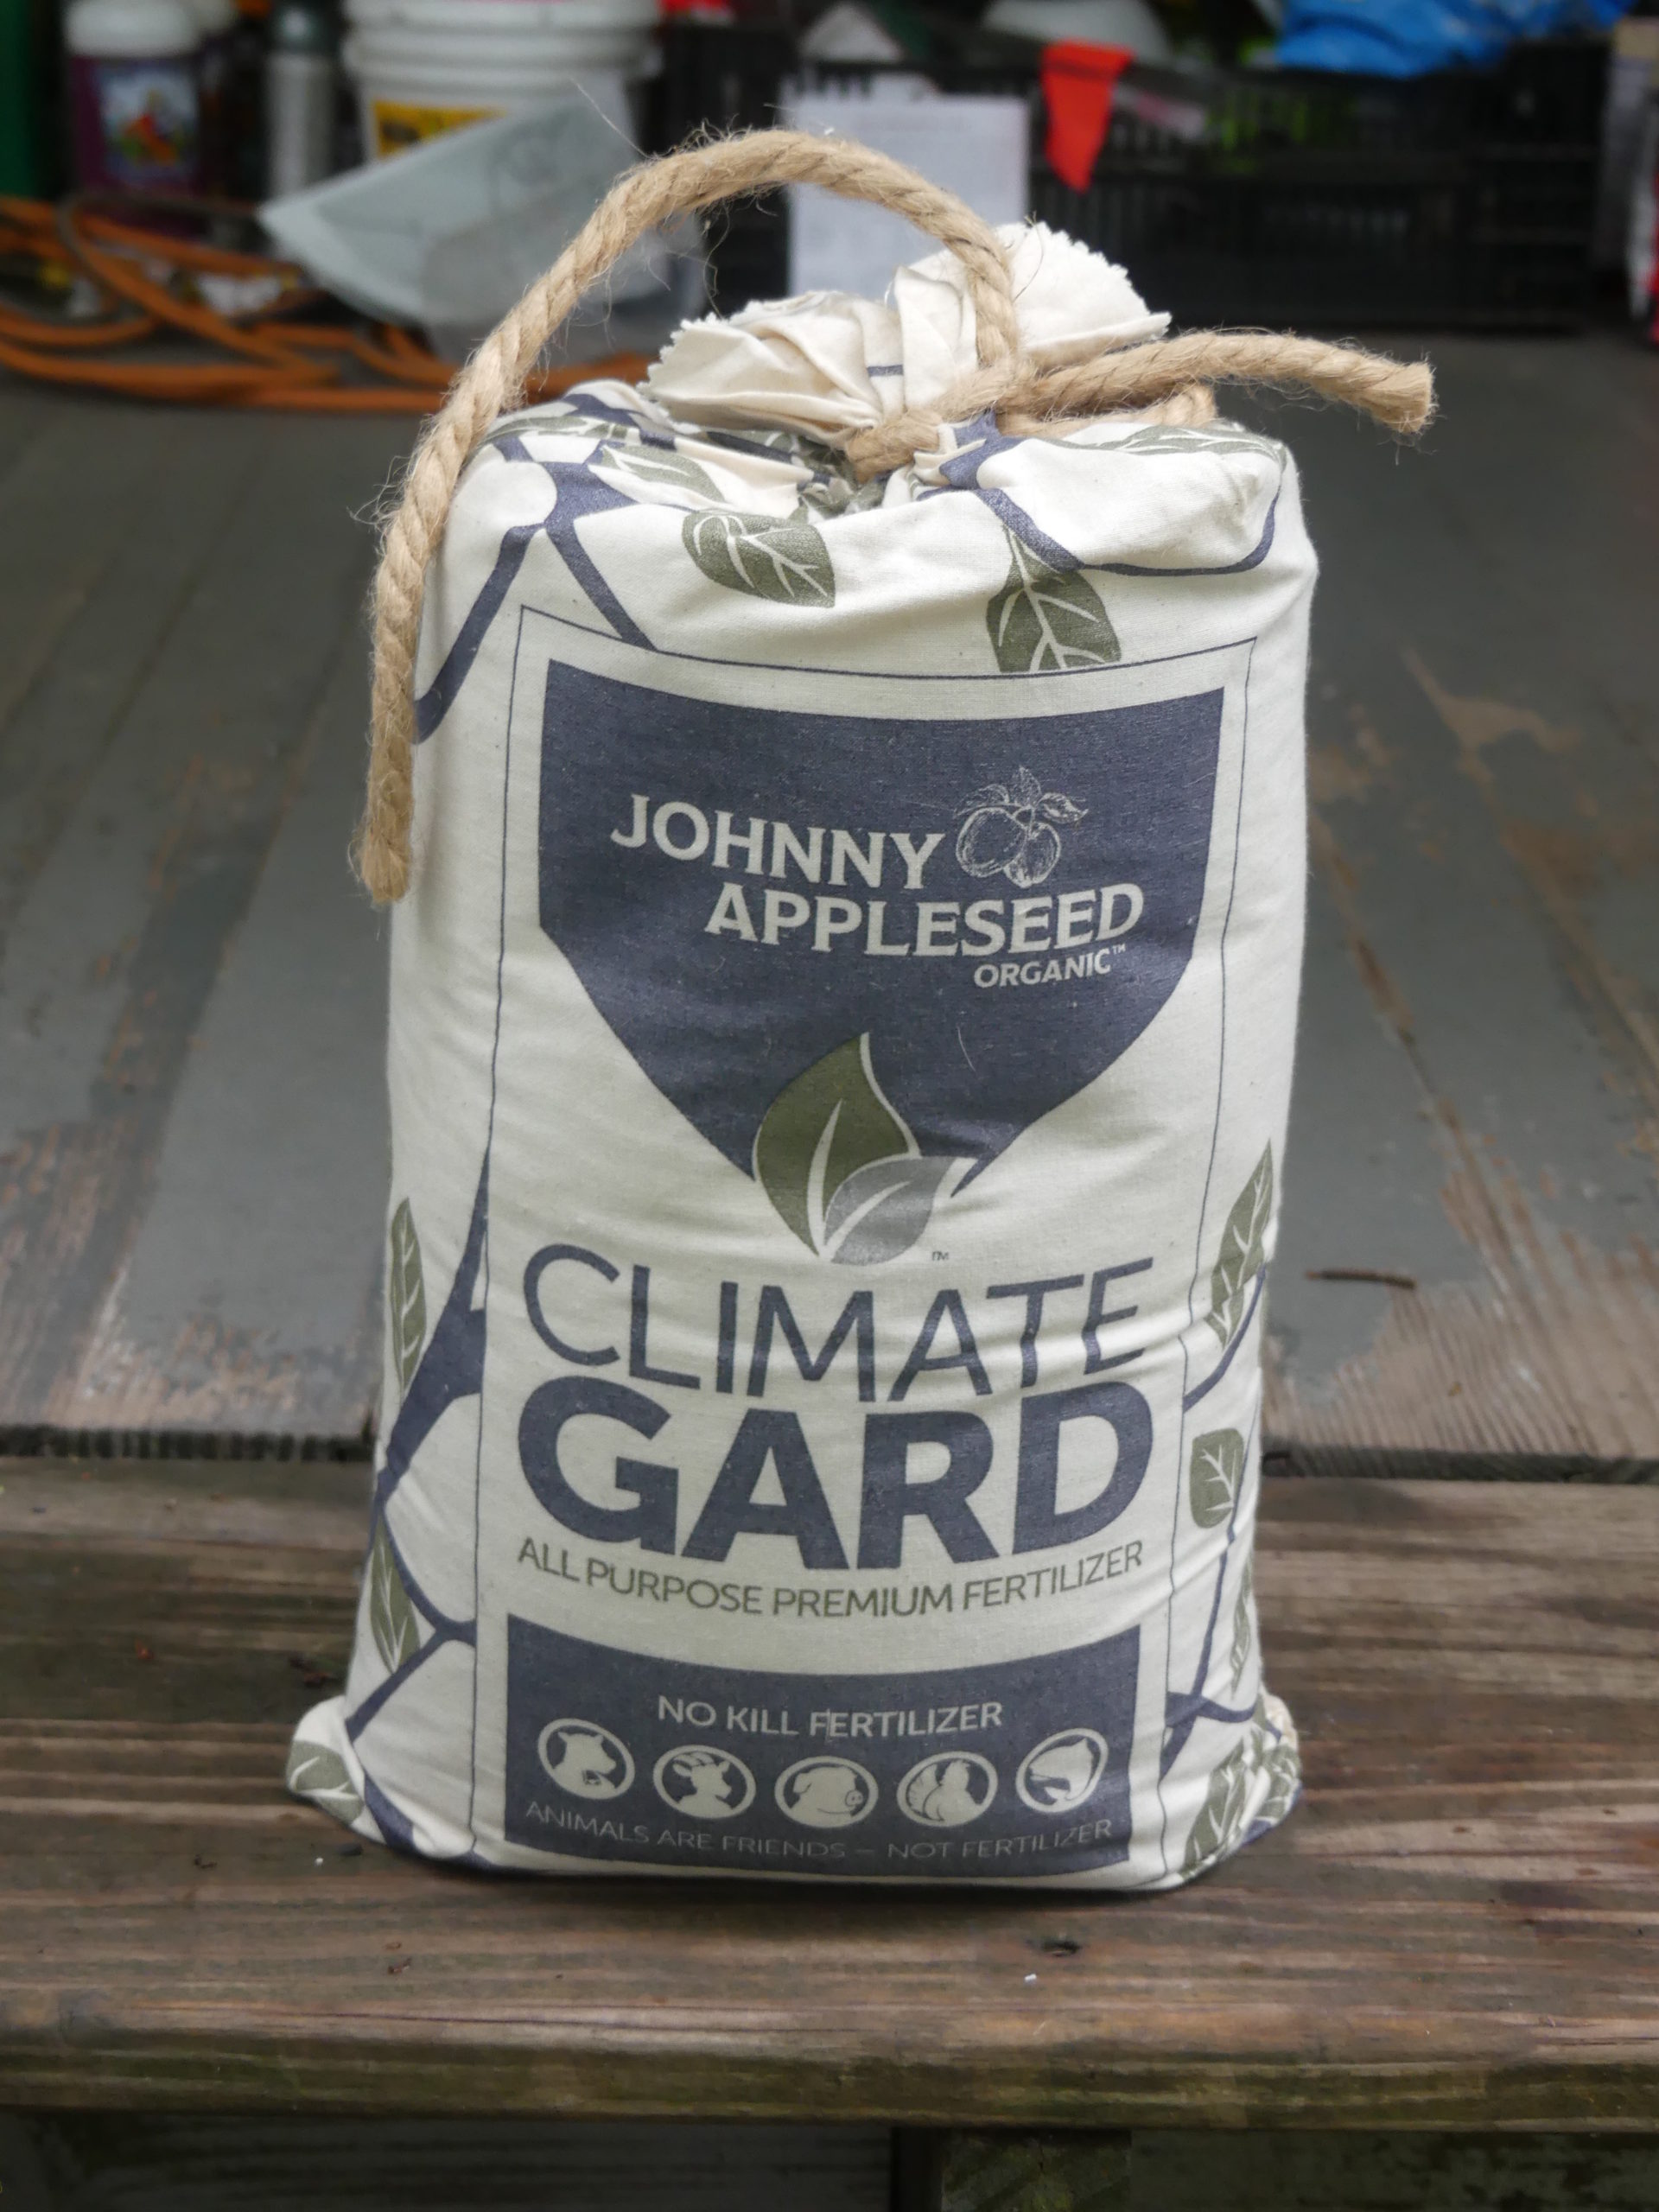 ClimateGard organic granular fertilizer, available from johnnyappleseed.com, is a new take on organic fertilizers. Unlike most other organics, this one contains no nutrients derived from slaughterhouse or fishery biproducts. They refer to it as the first “no-kill” fertilizer. Available in a 4-4-4 balanced formula, it will set you back $40 for a 7.5-pound bag.